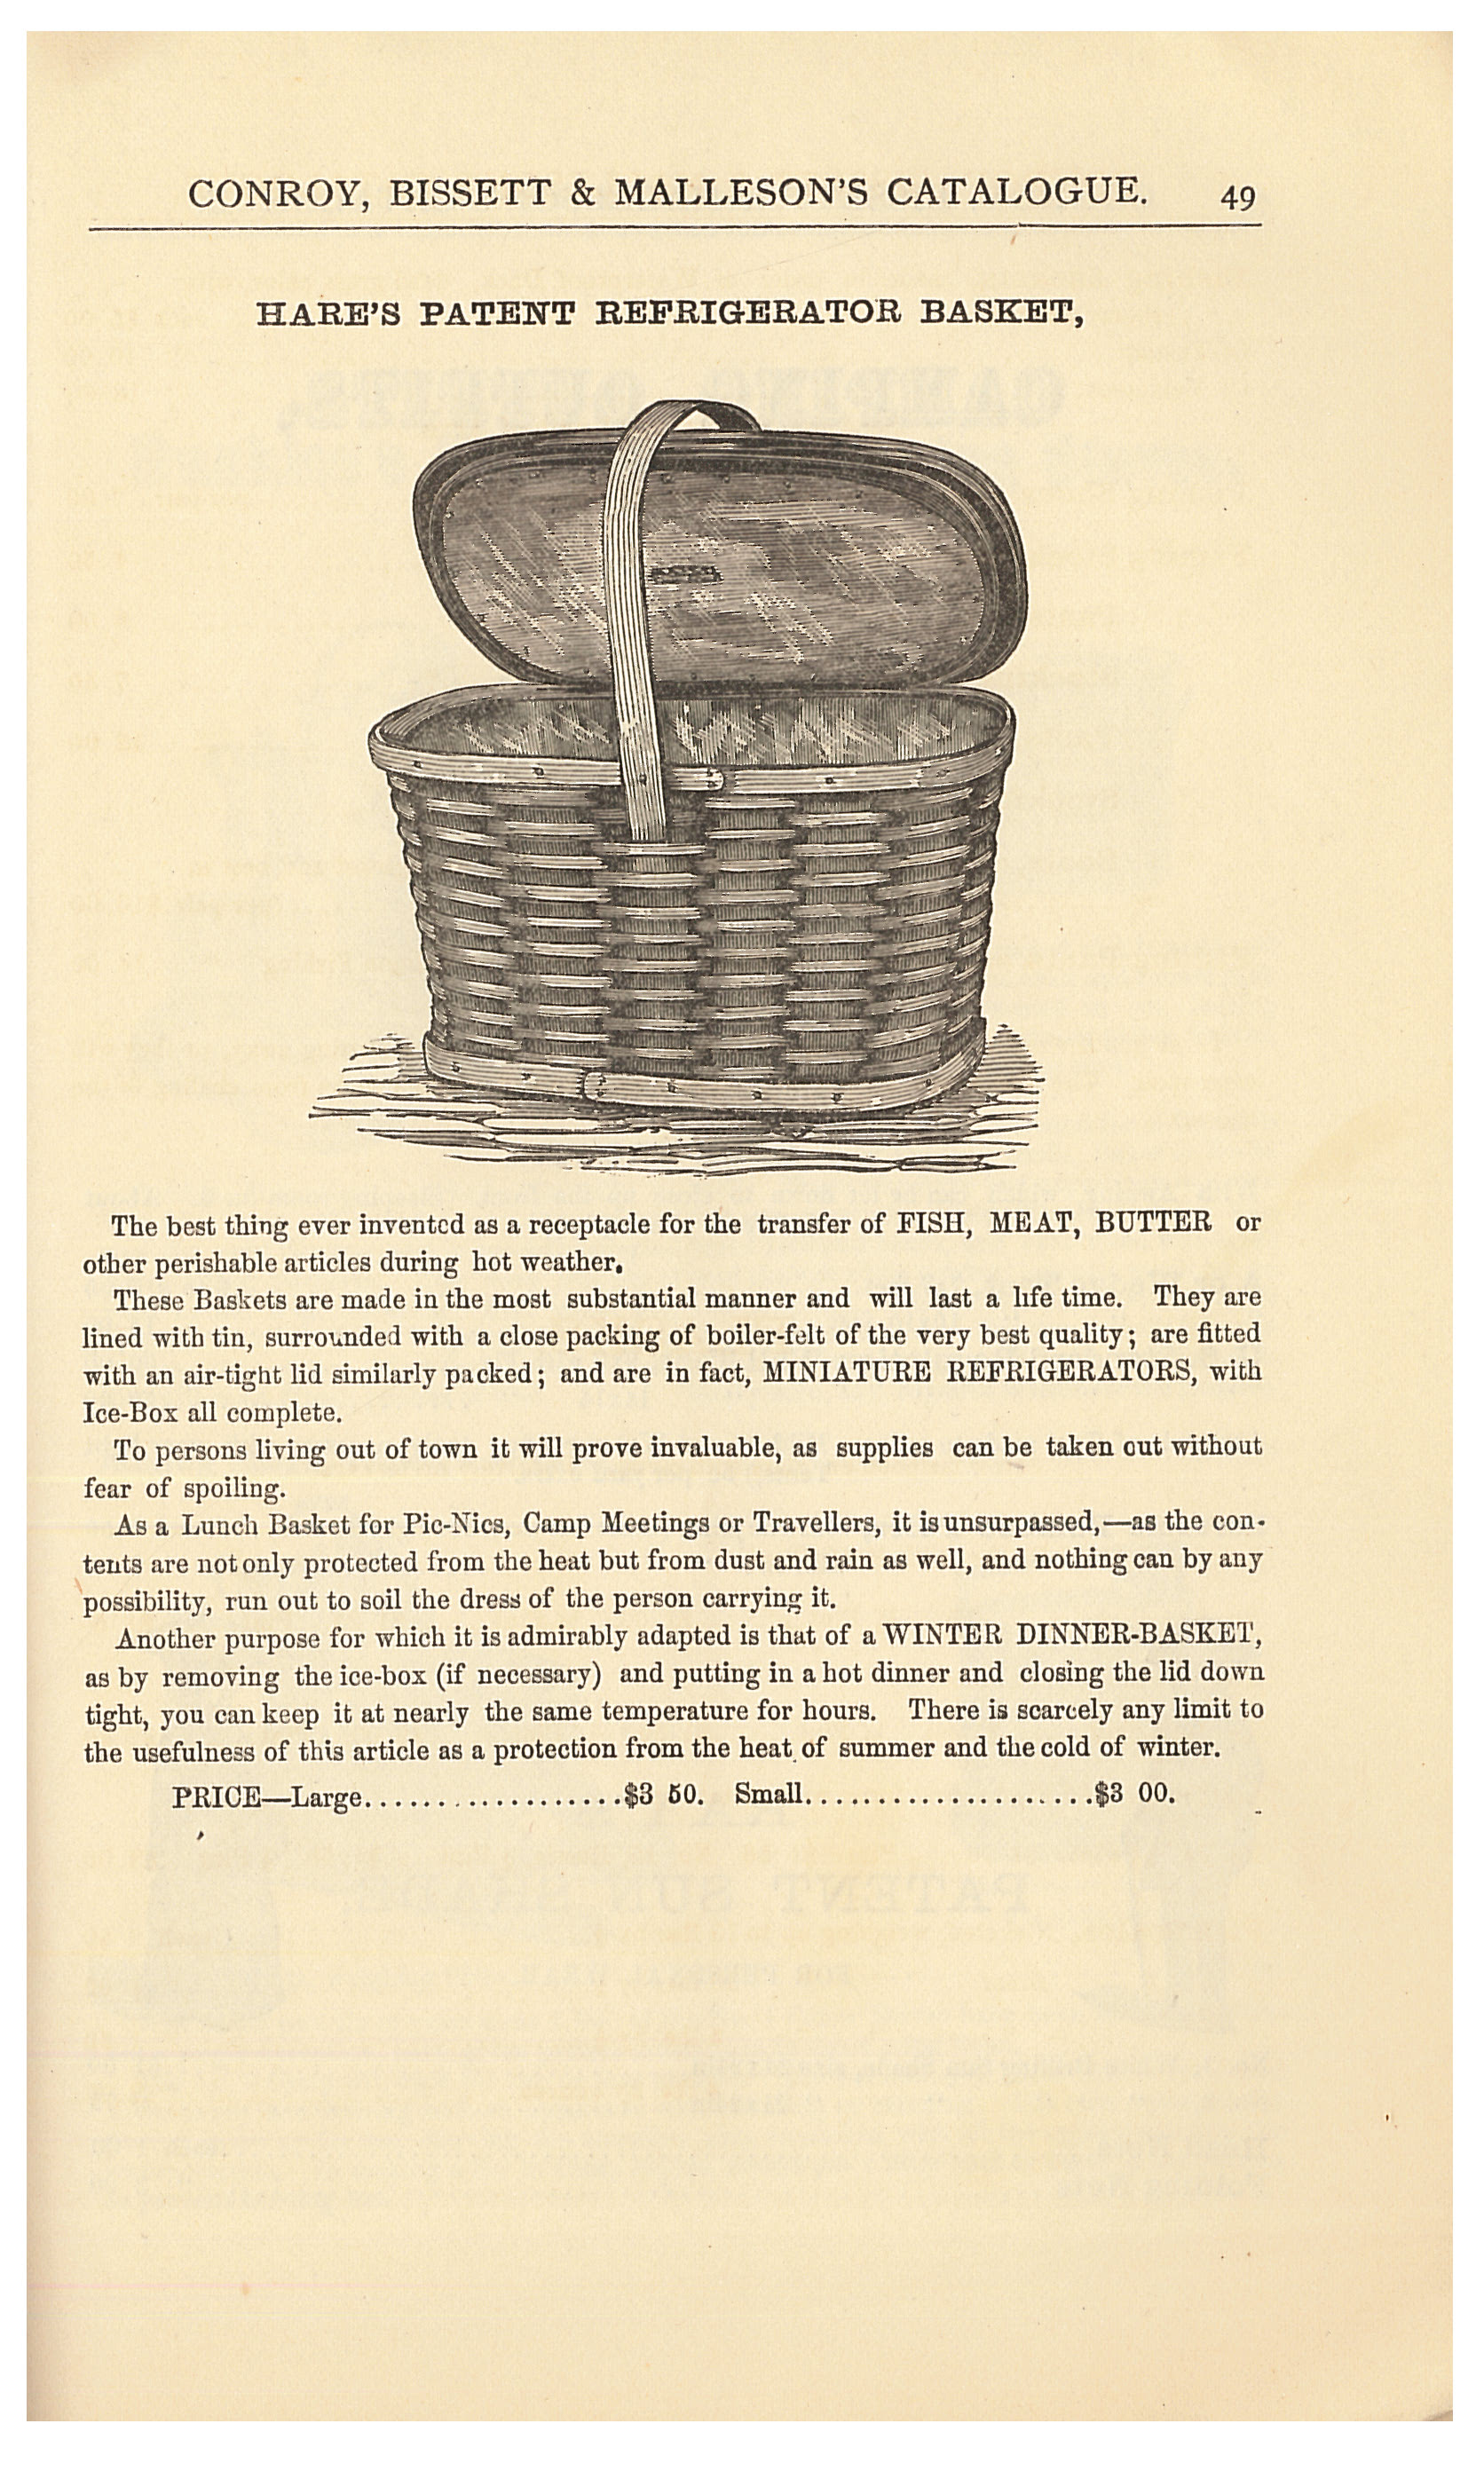 Staying cool for a 19th Century picnic – Smithsonian Libraries and